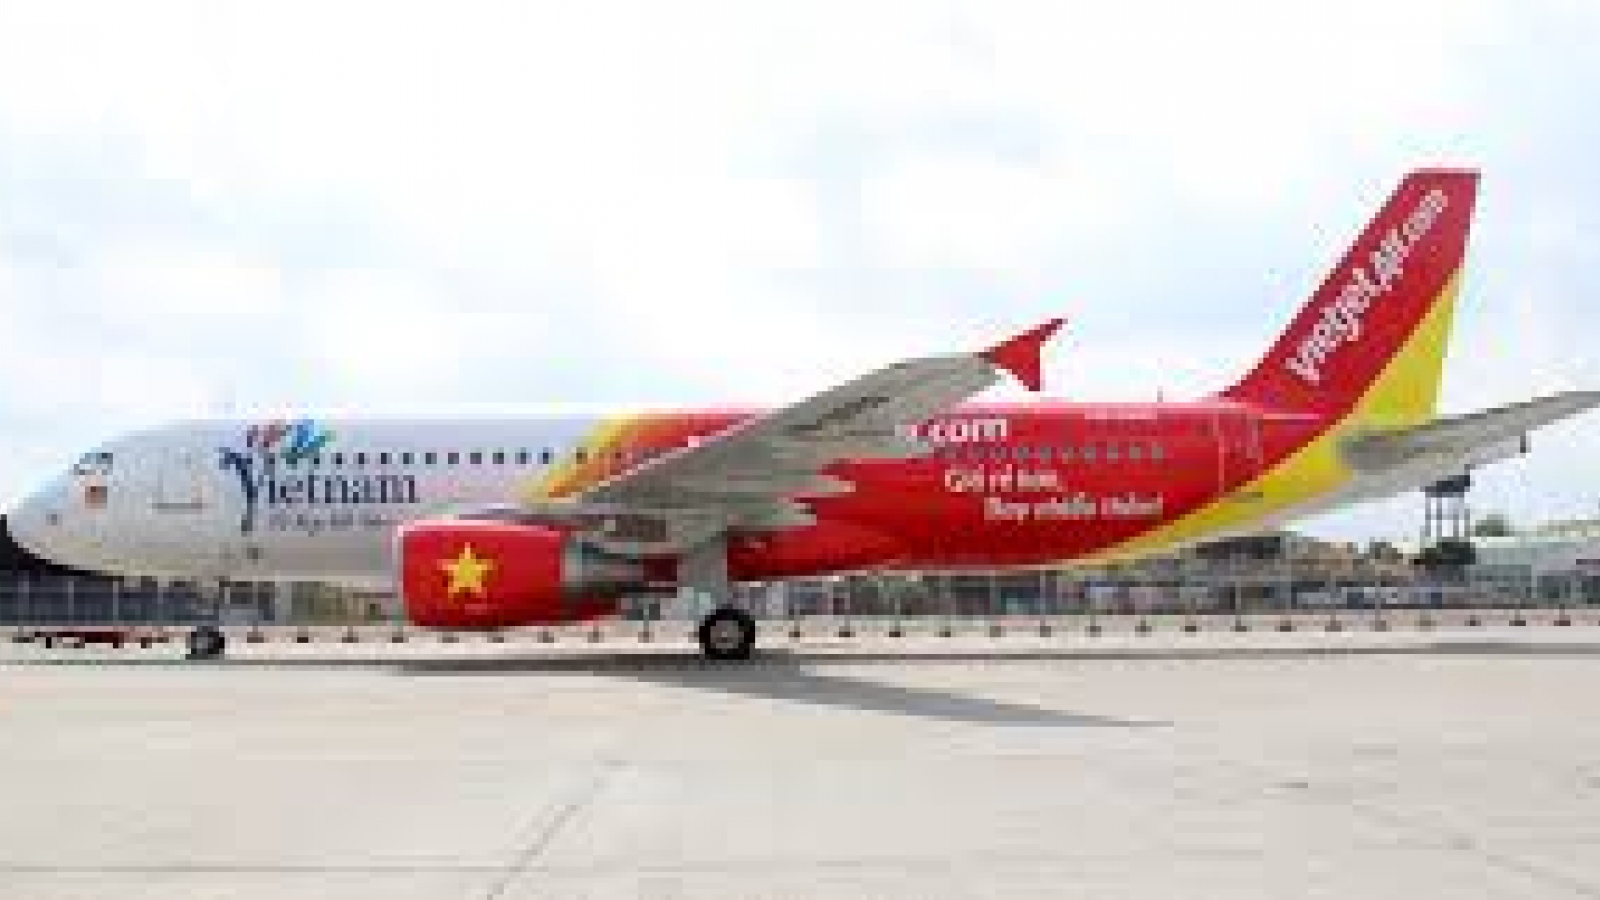 Vietjet Air brings home 230 Vietnamese citizens from Taiwan (China)